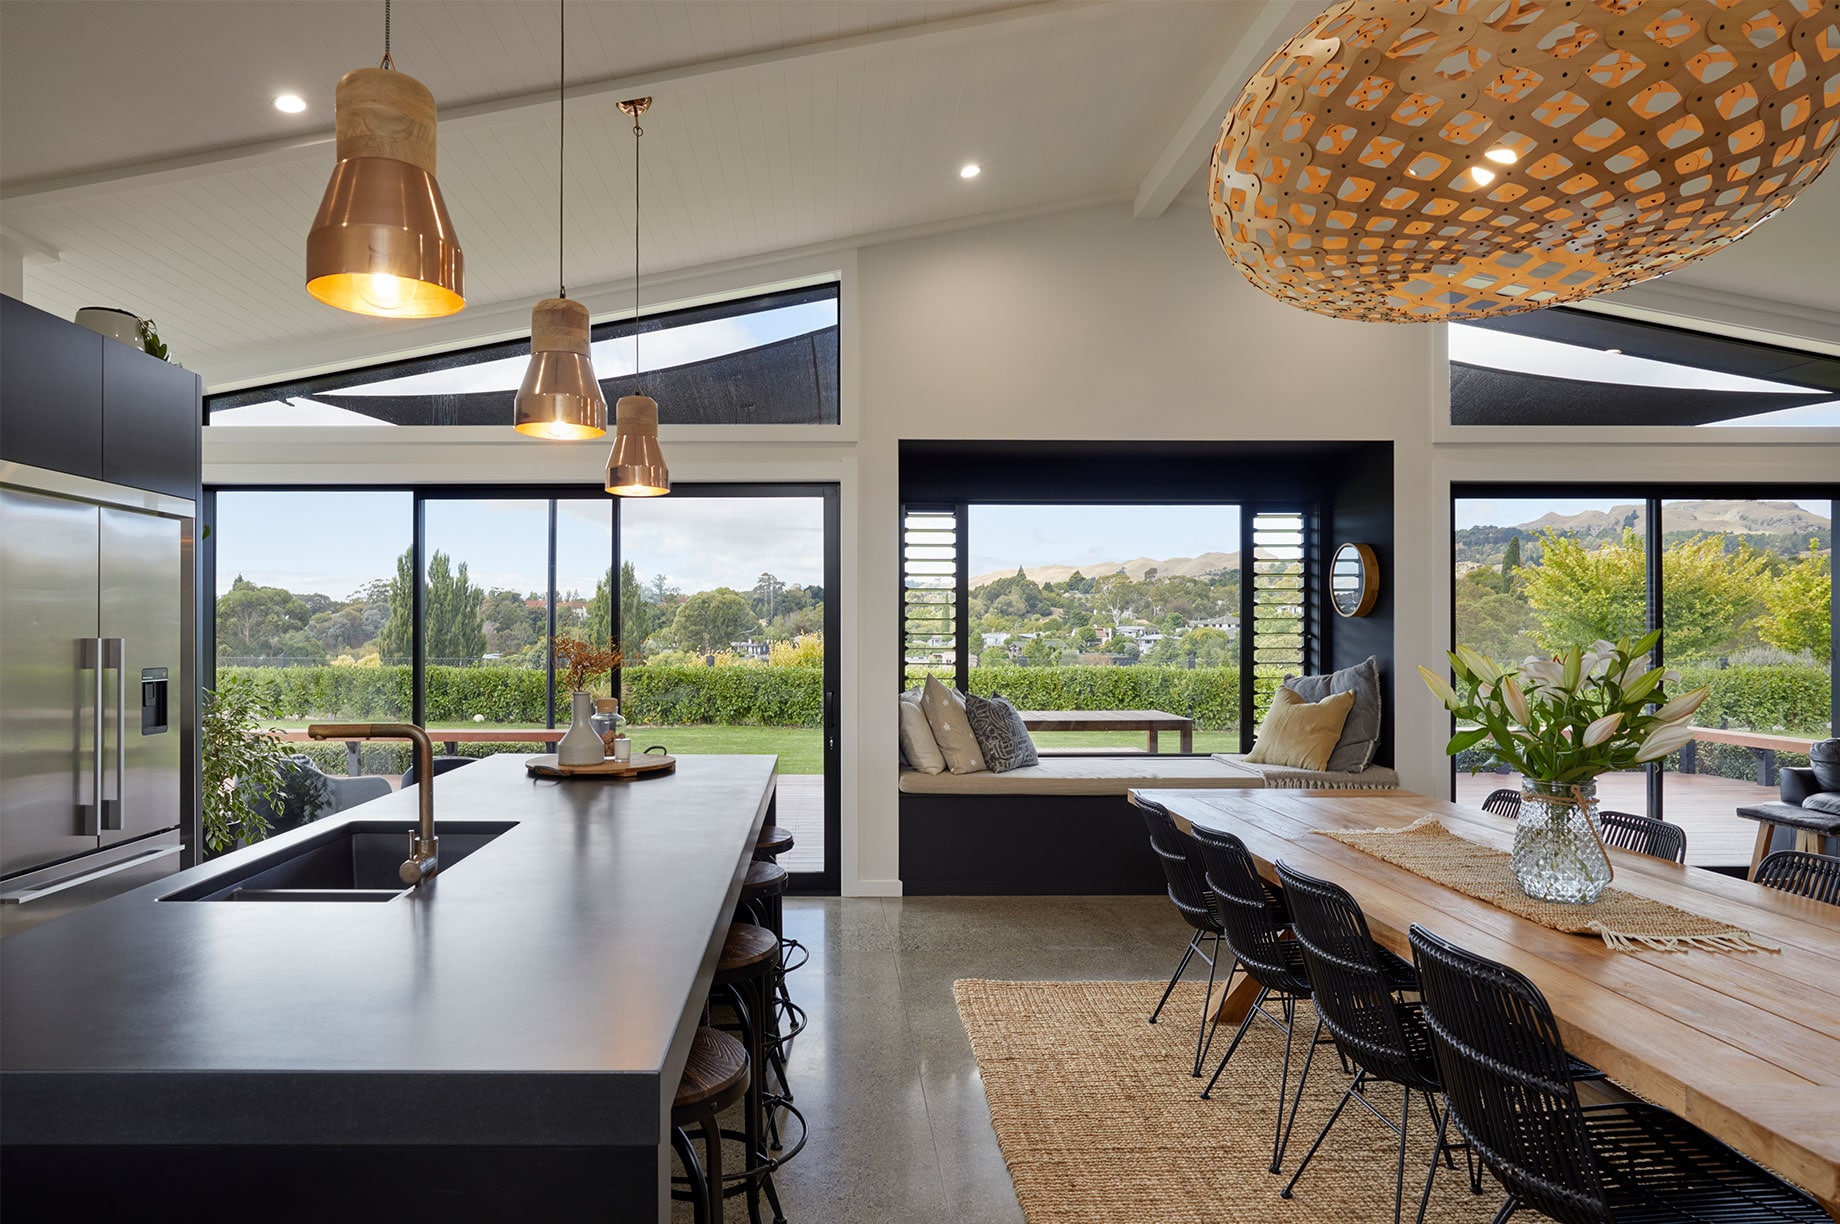 Kitchen and dining interior with hill views